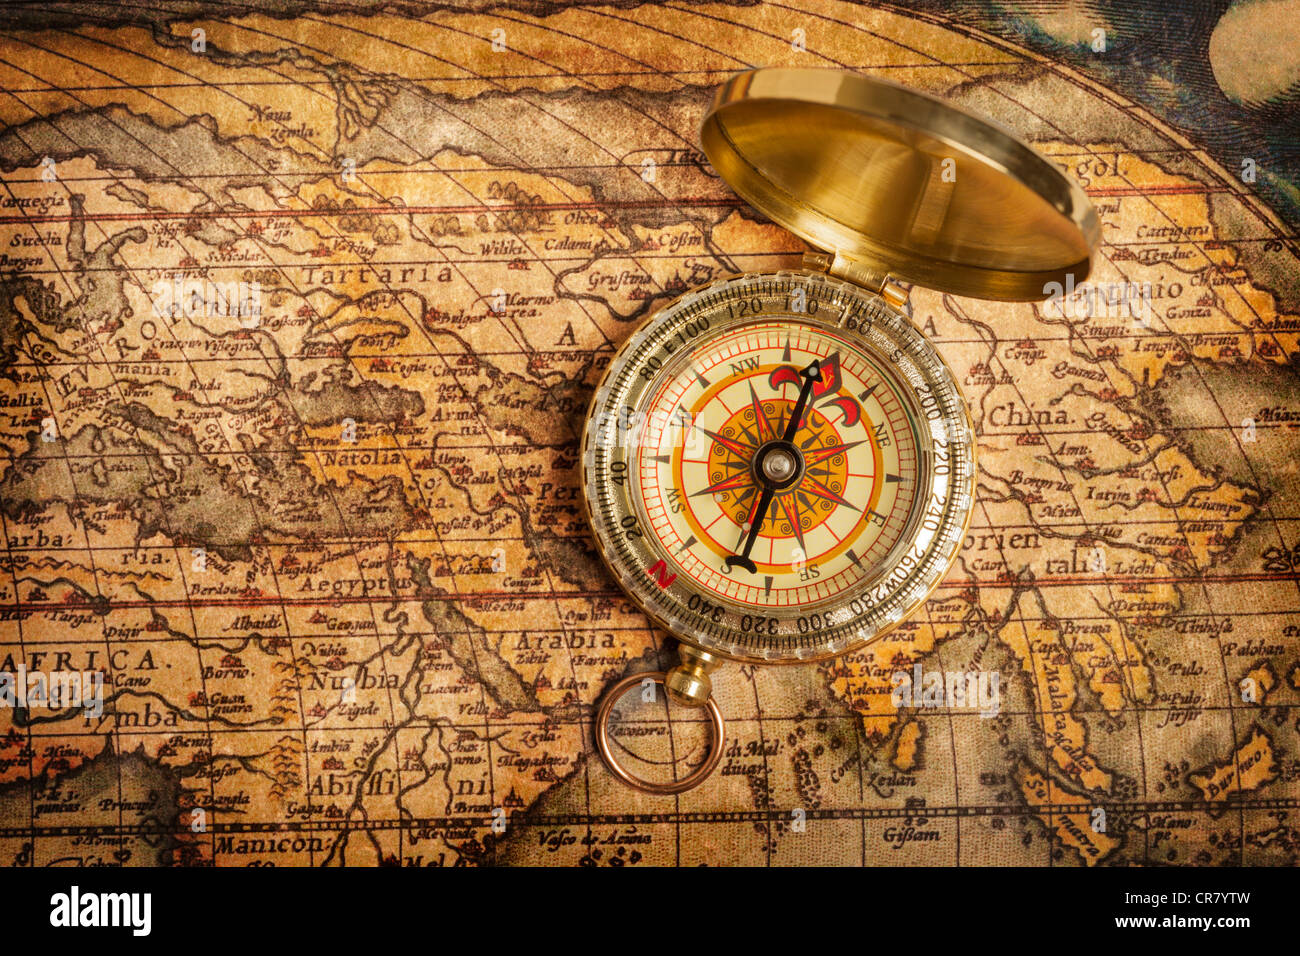 Old vintage retro golden compass on ancient map Stock Photo